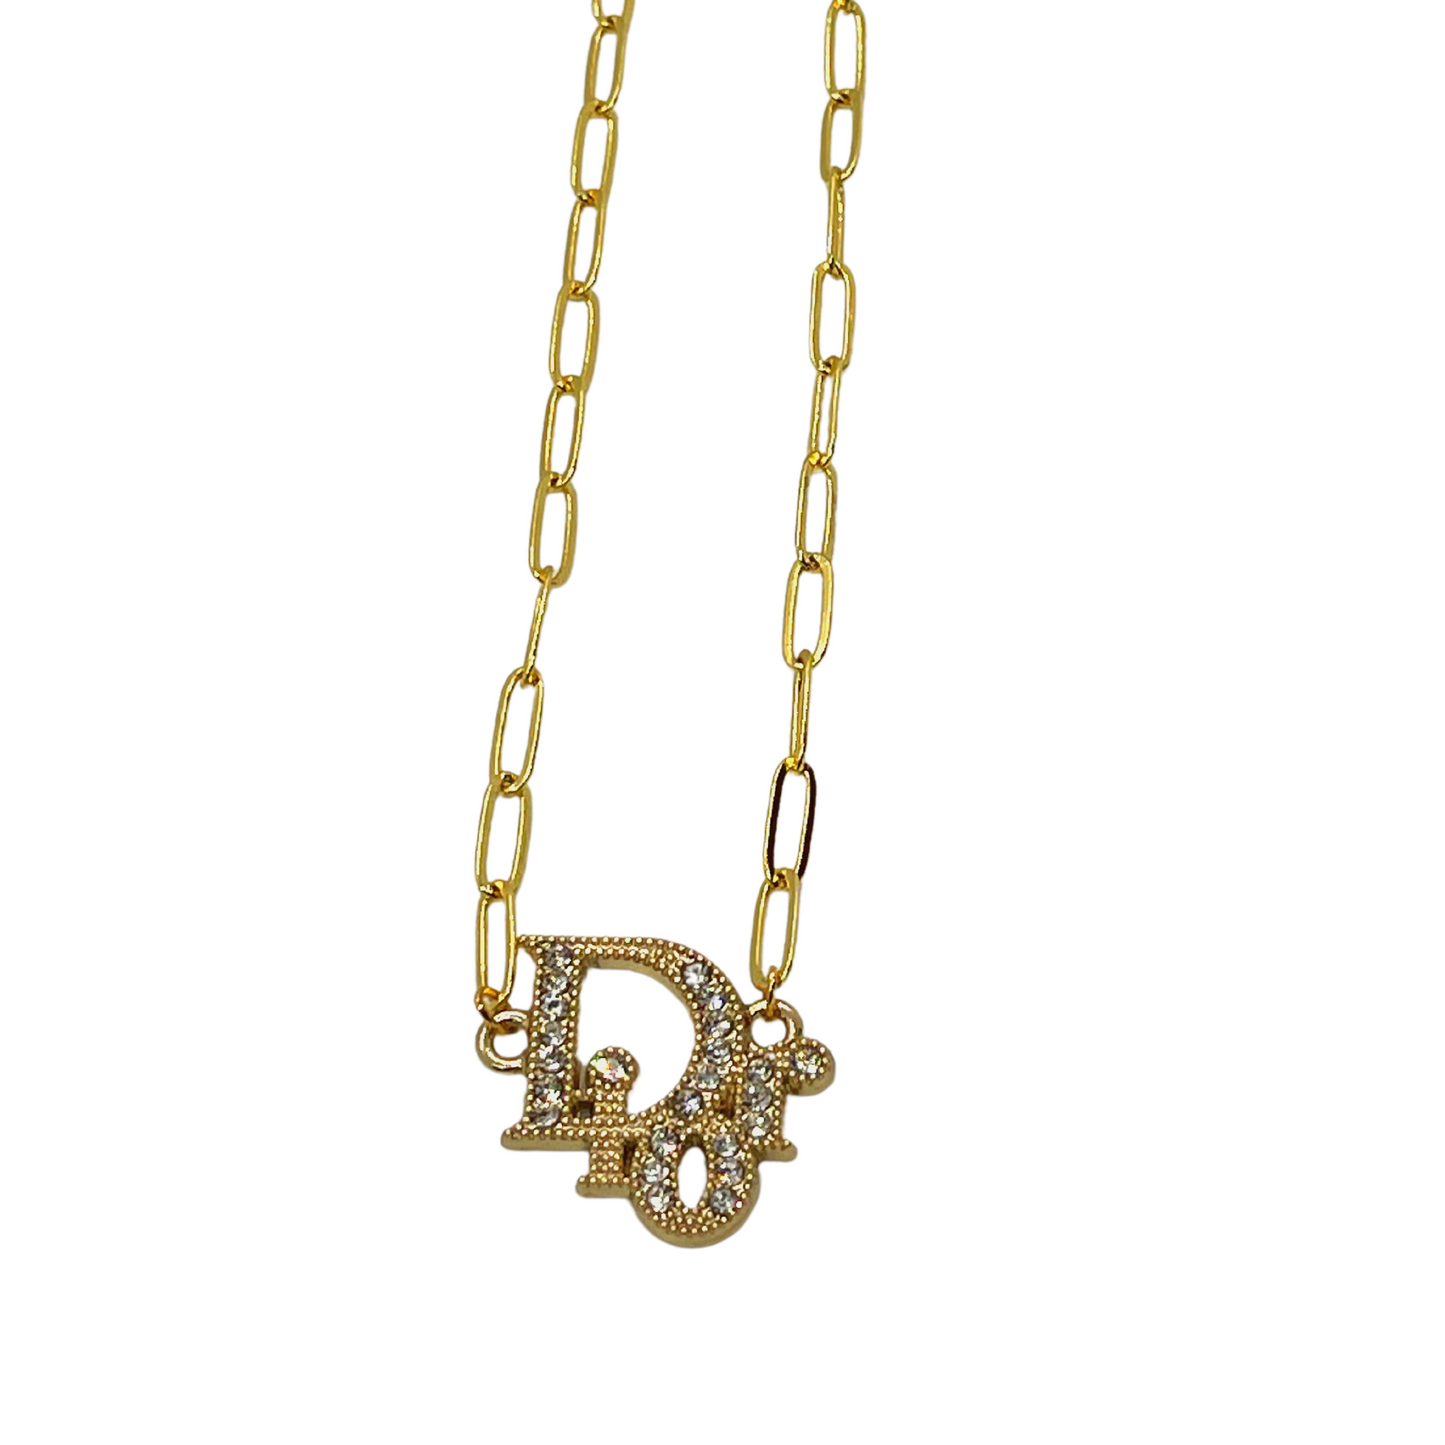 Authentic Dior Crystal Pendant | Reworked Gold 14-16" Necklace